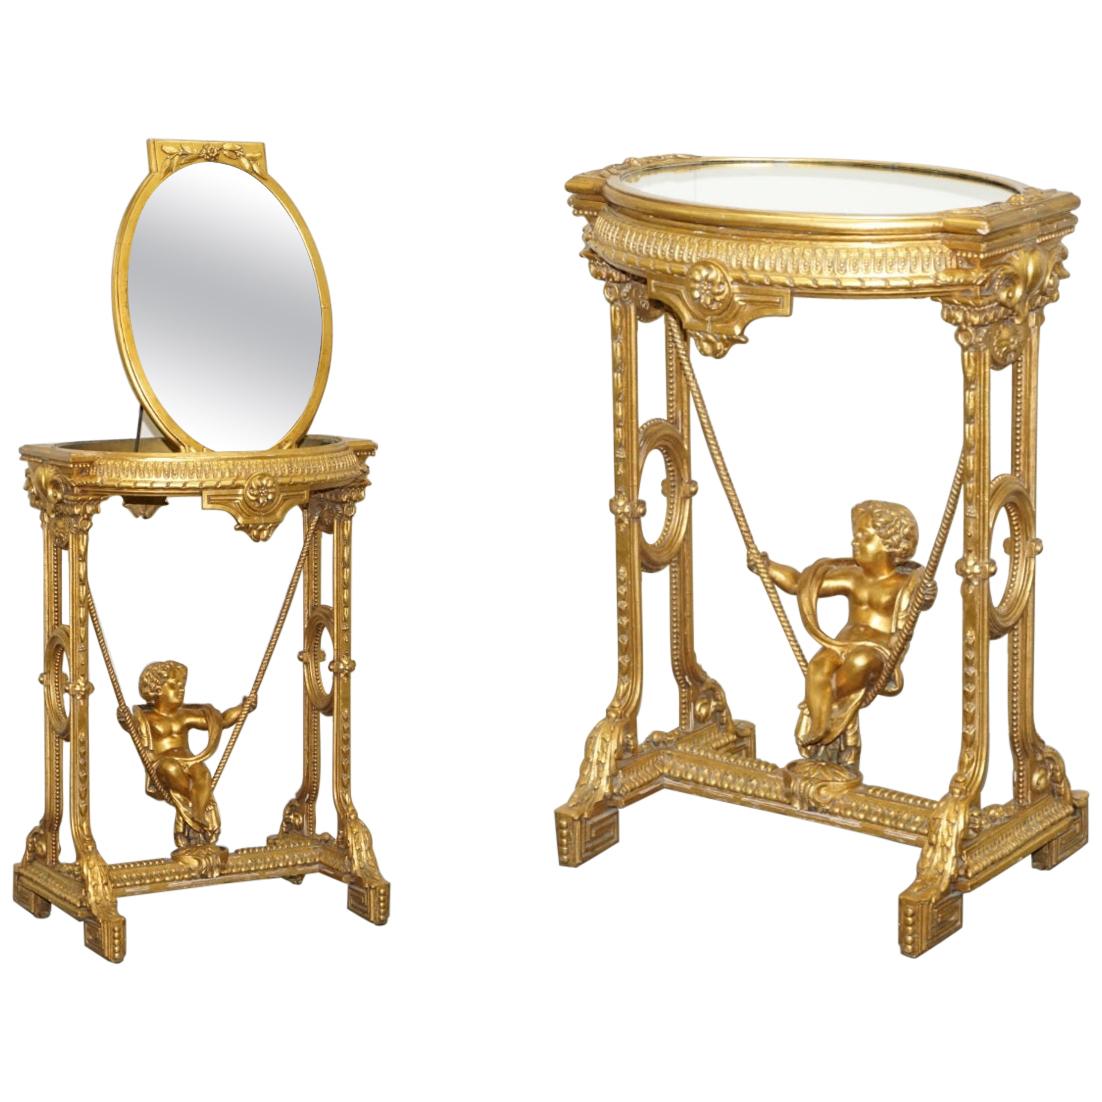 Gold Giltwood Occasional Table with Mirror Top and Cherub Putti Swing circa 1920